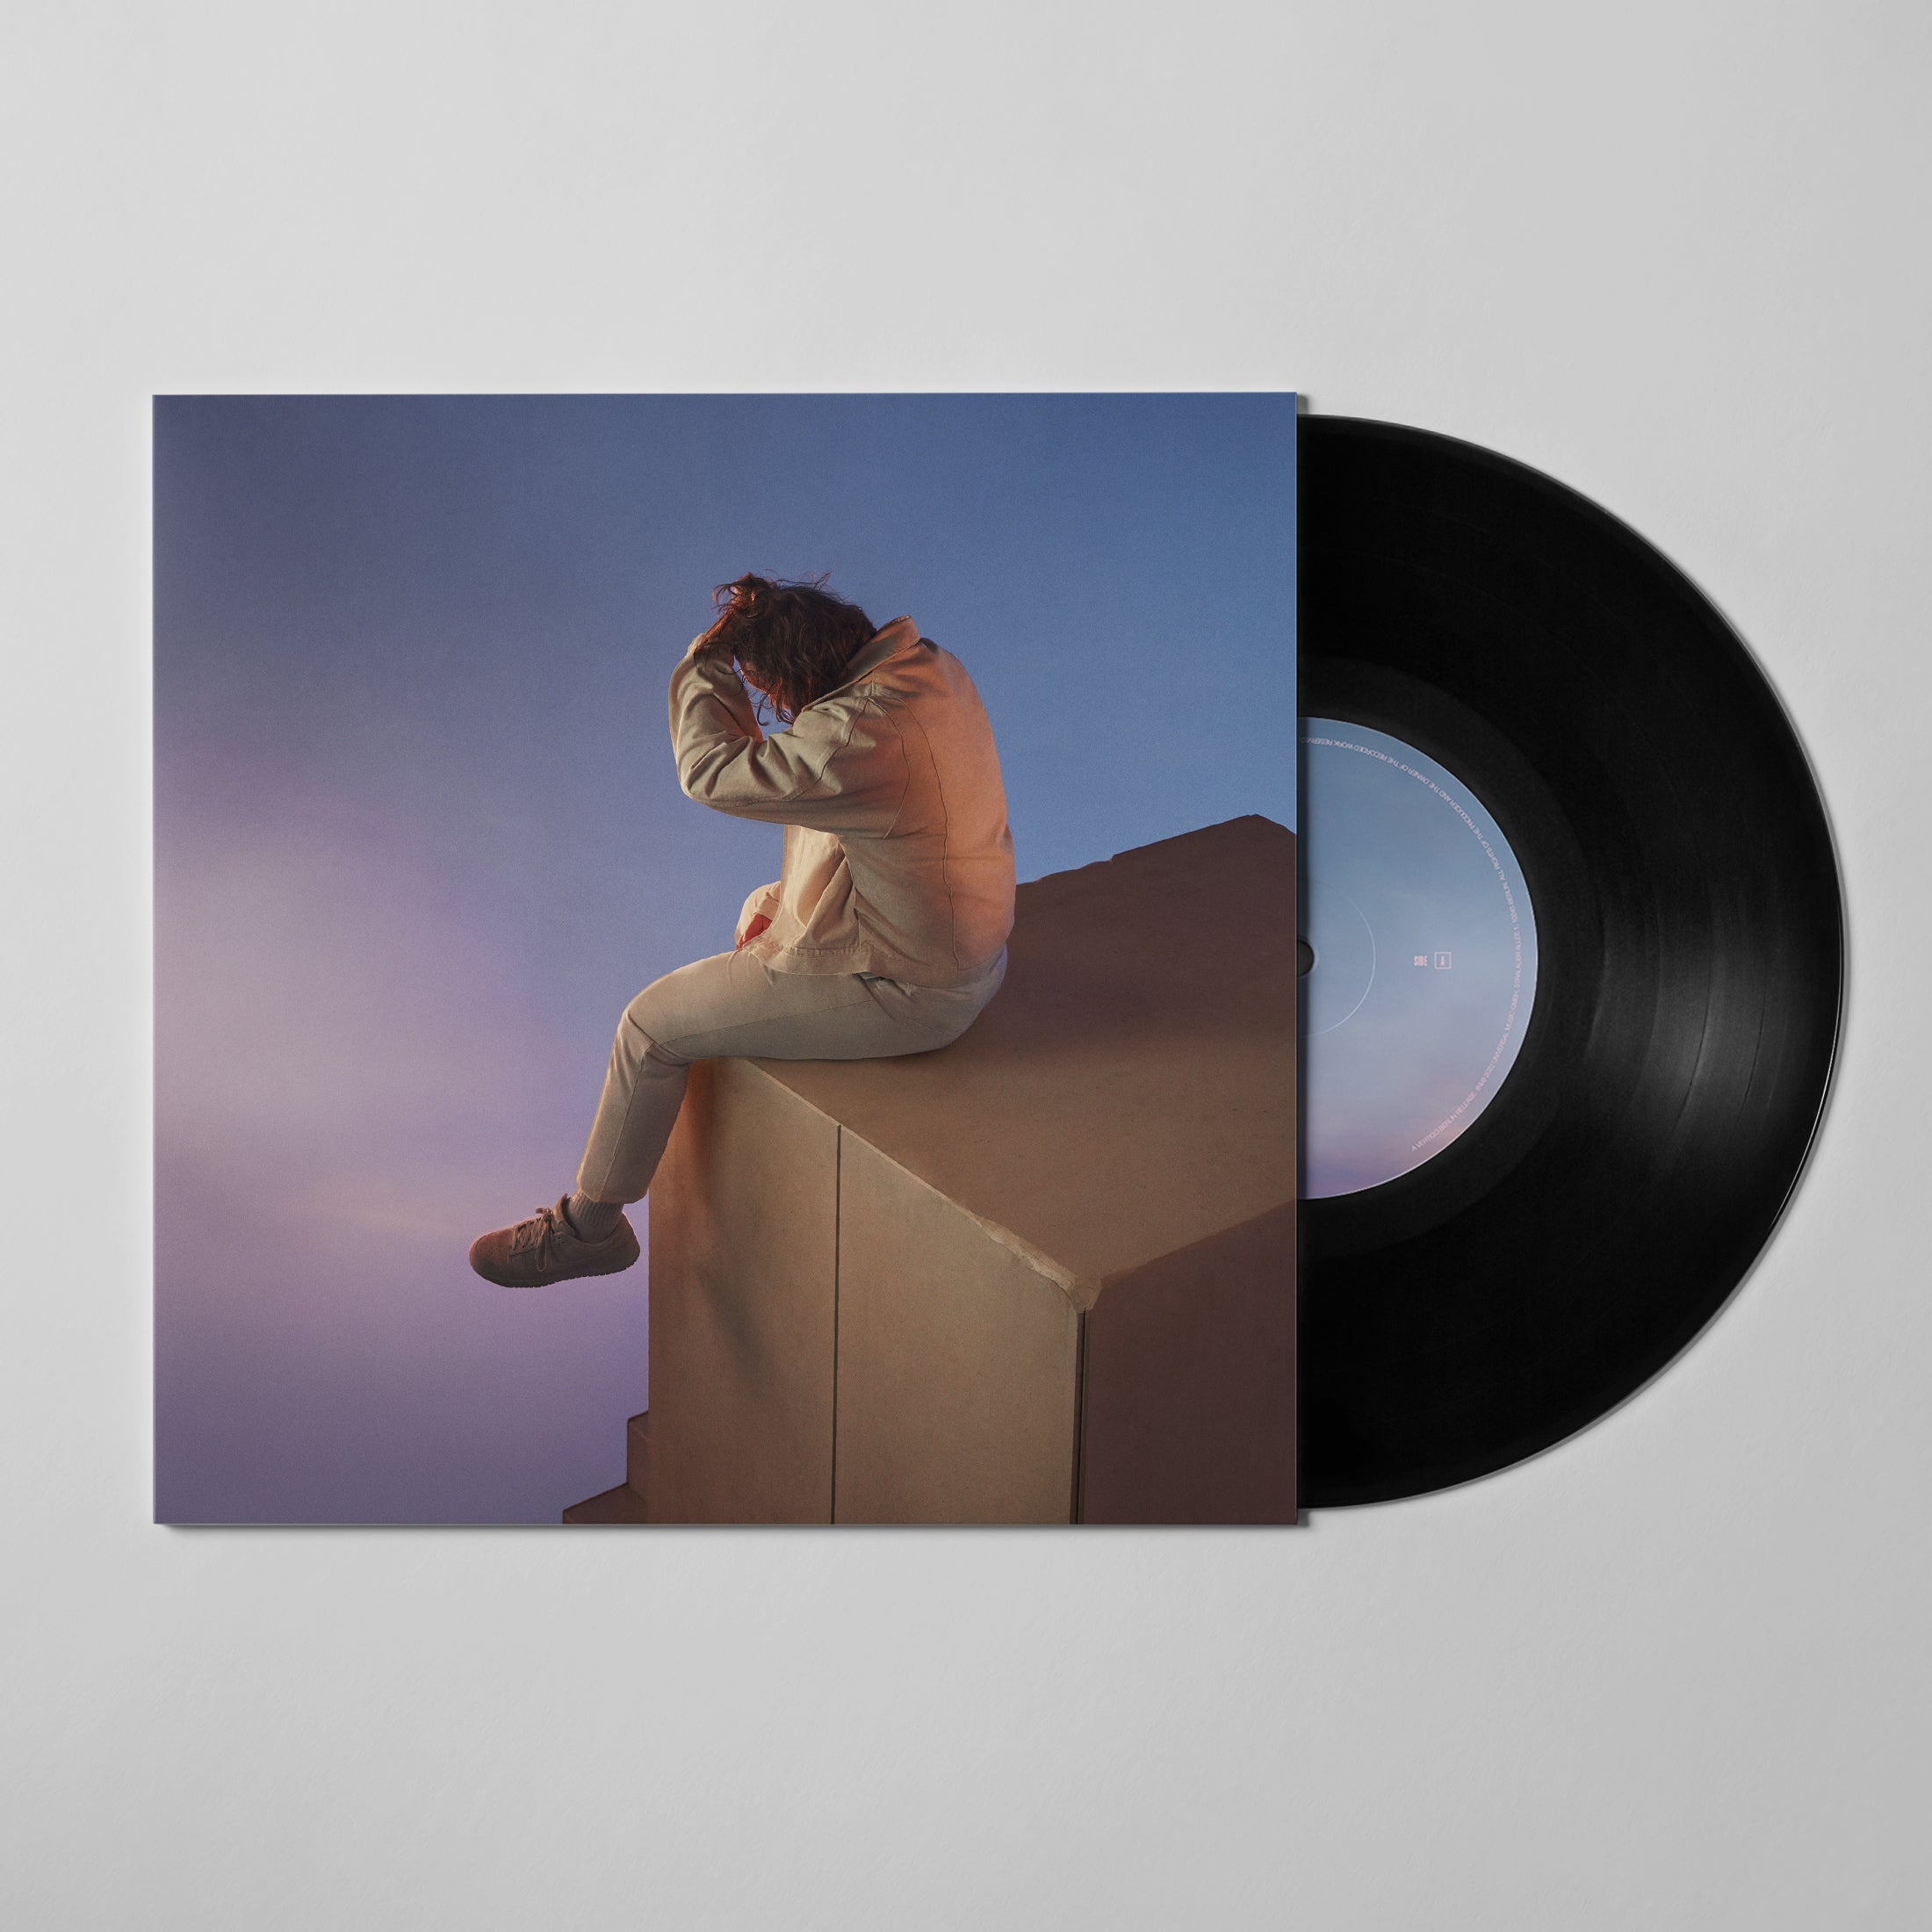 Lewis Capaldi - ‘Wish You The Best’ Limited Edition 7” Vinyl Single